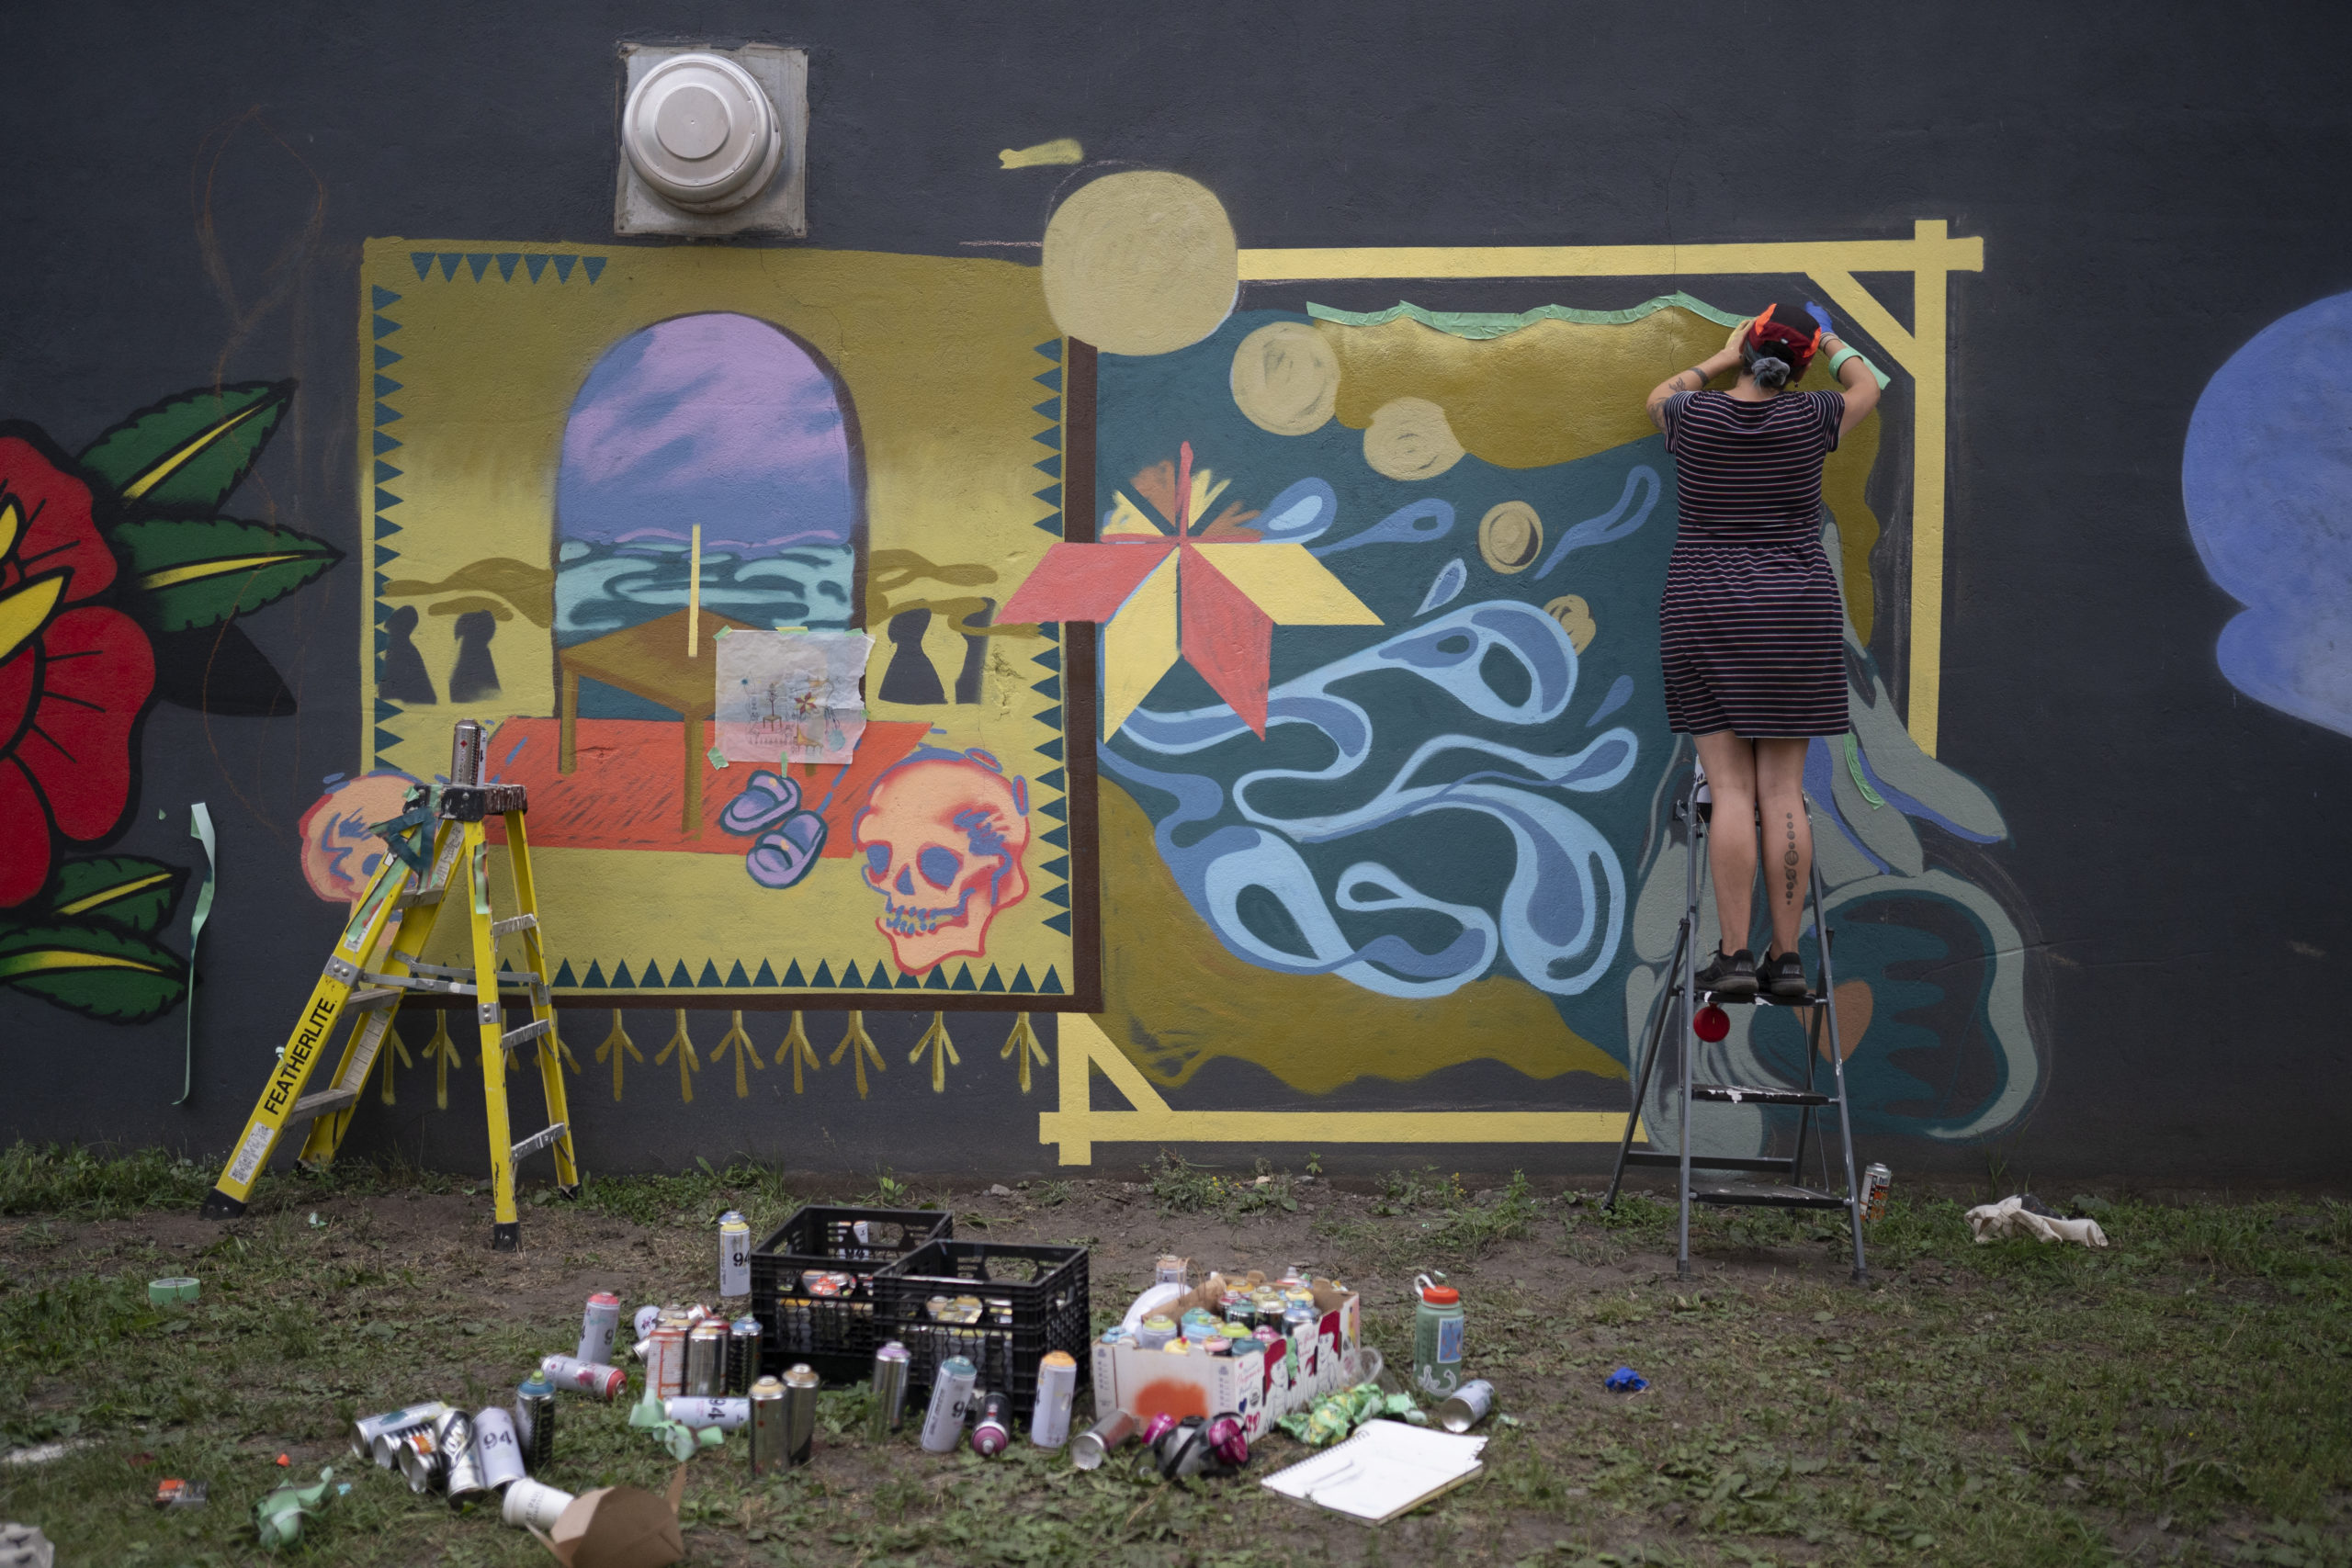 Photo of artist Shelby Gagnon on a step ladders and painting her mural, there are spray cans and supplies scattered around scene. The mural has colours of yellow ochre, purple, blue and red.